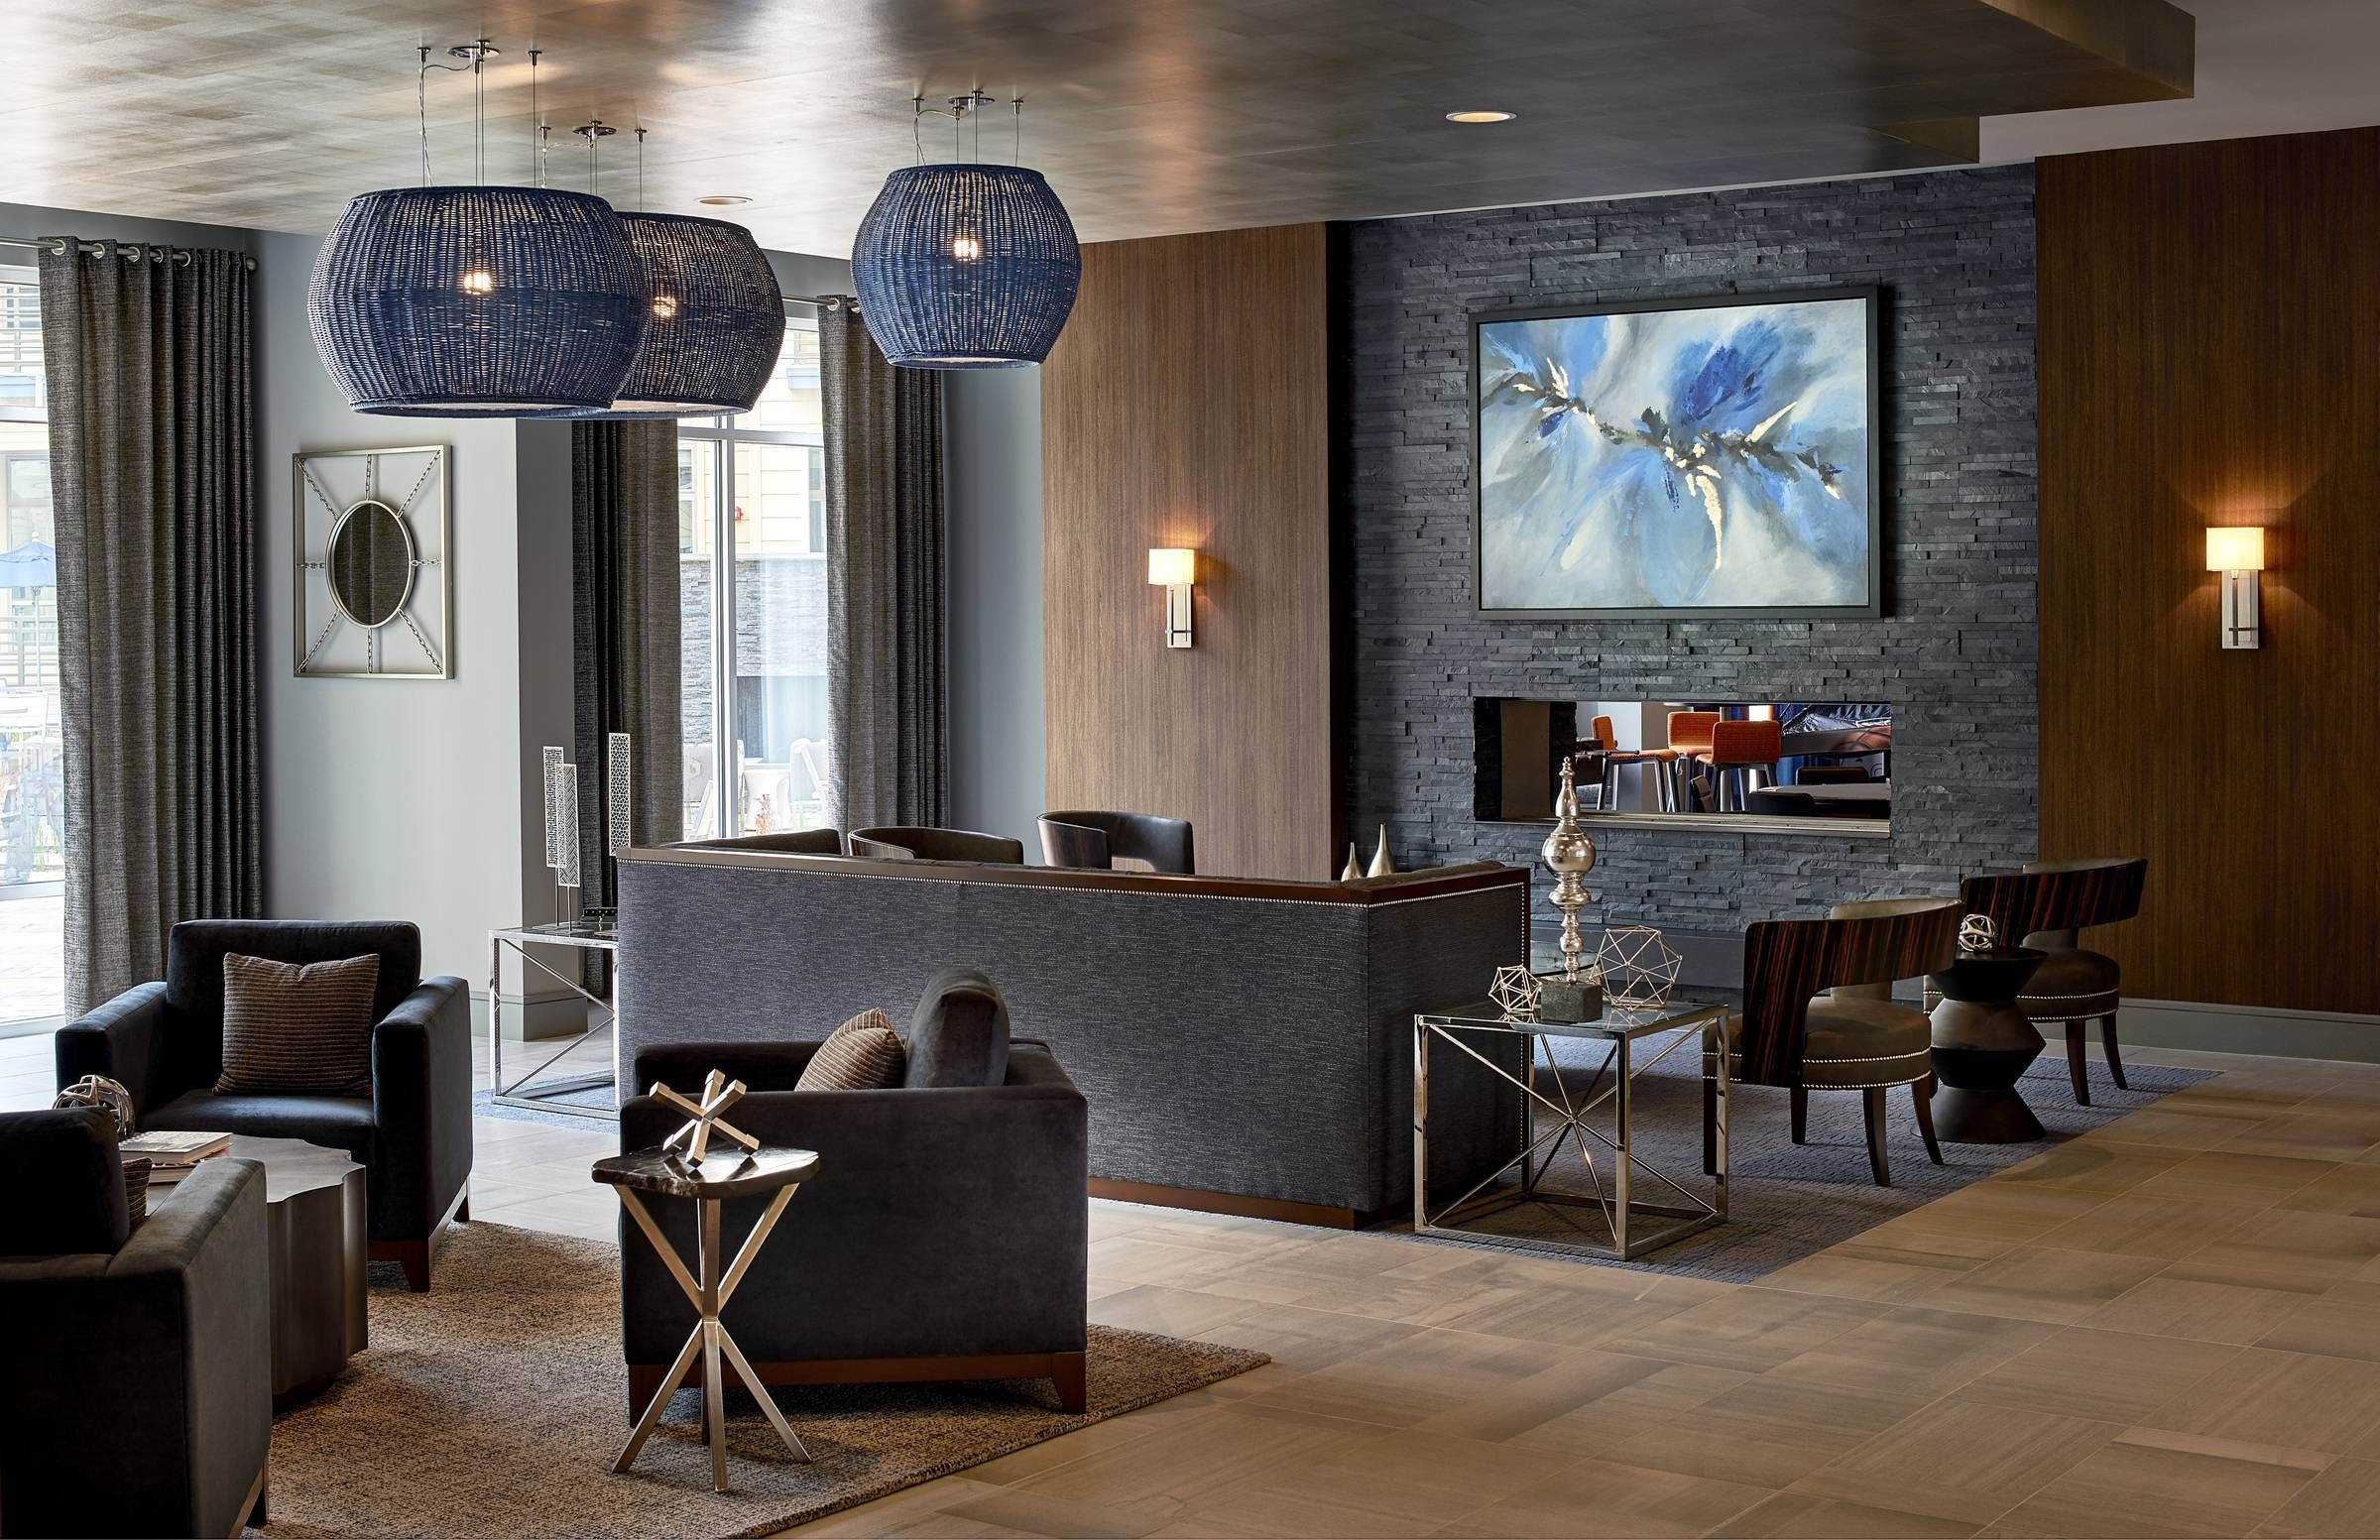 Evolution at Towne Center Laurel upscale clubhouse lounge area with seating and modern decor.